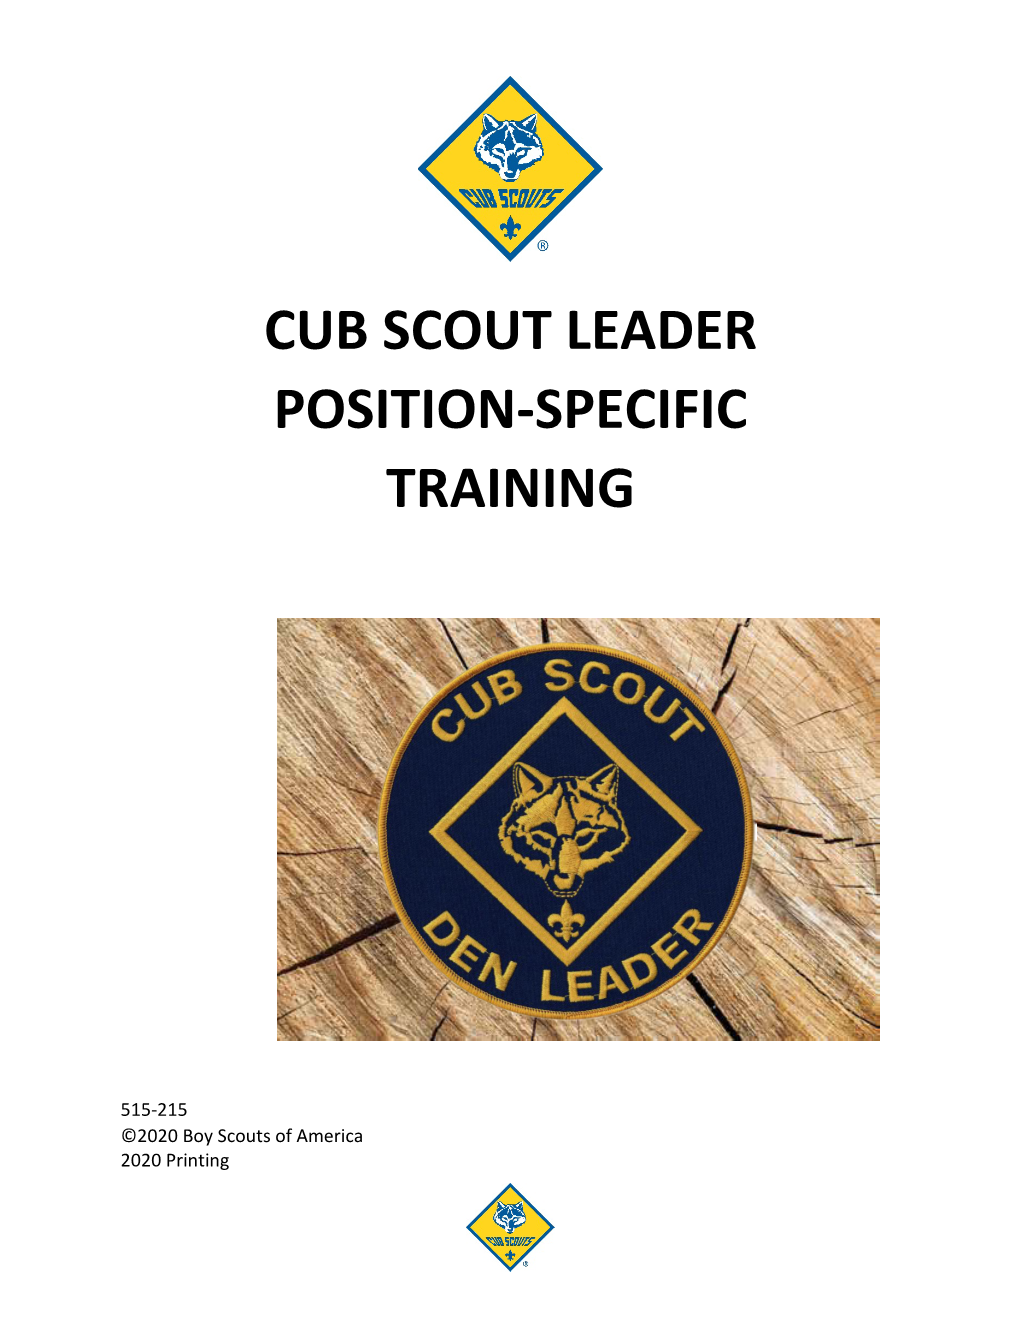 Cub Scout Leader Position-Specific Training